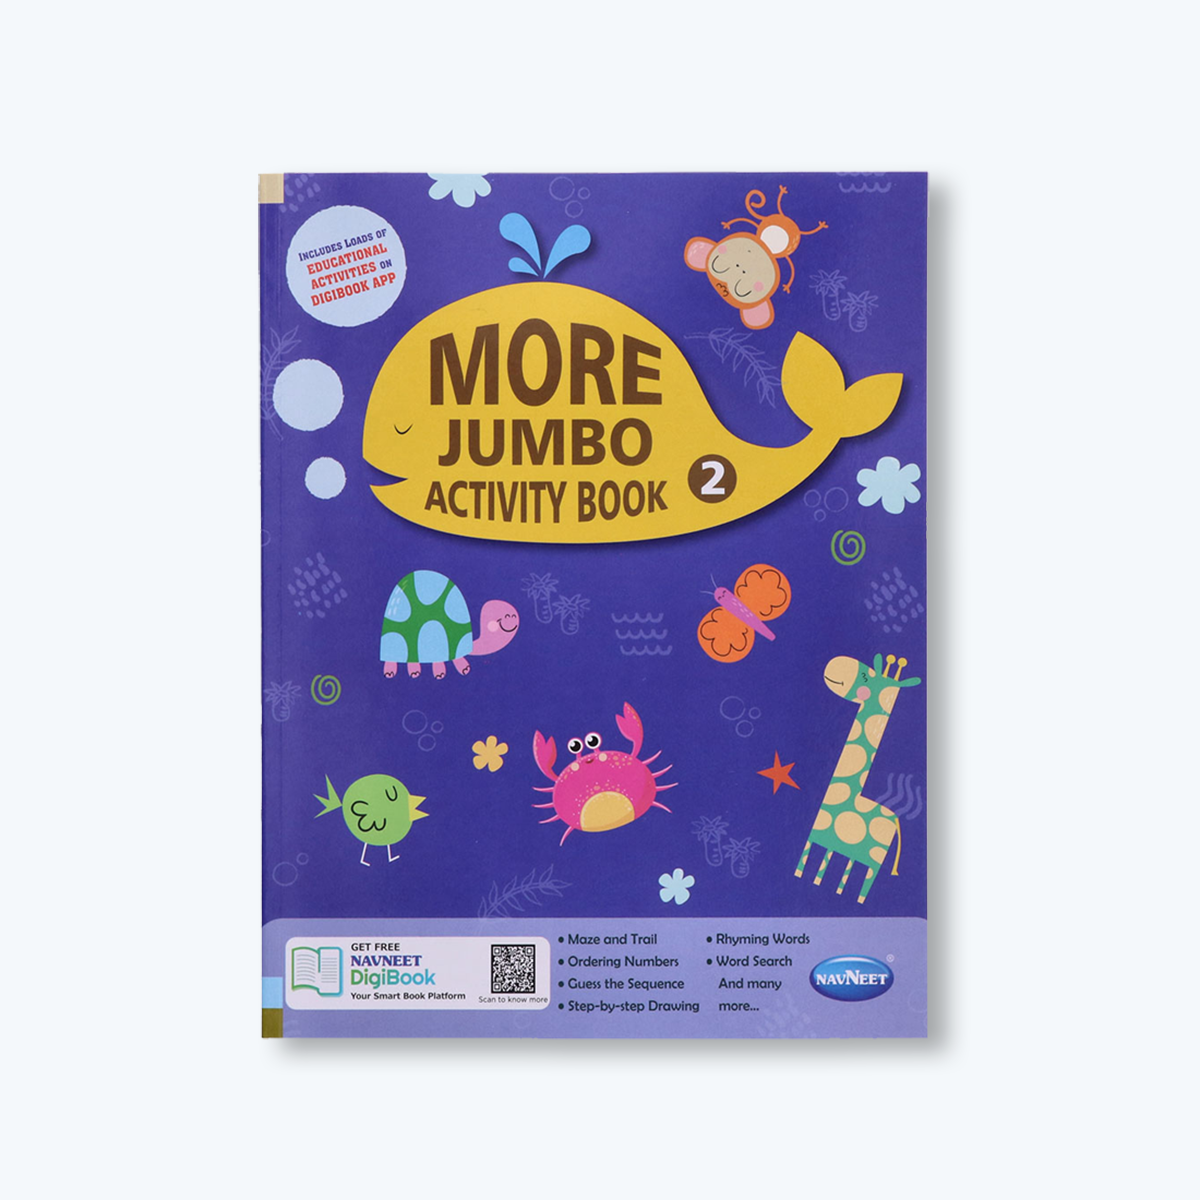 Navneet More Jumbo Activity Book 2- Fun Activities for Kids- Maze and trail, Rhyming Words, Ordering Numbers, Word Search, Guess the Sequence, Step-by-step Drawing